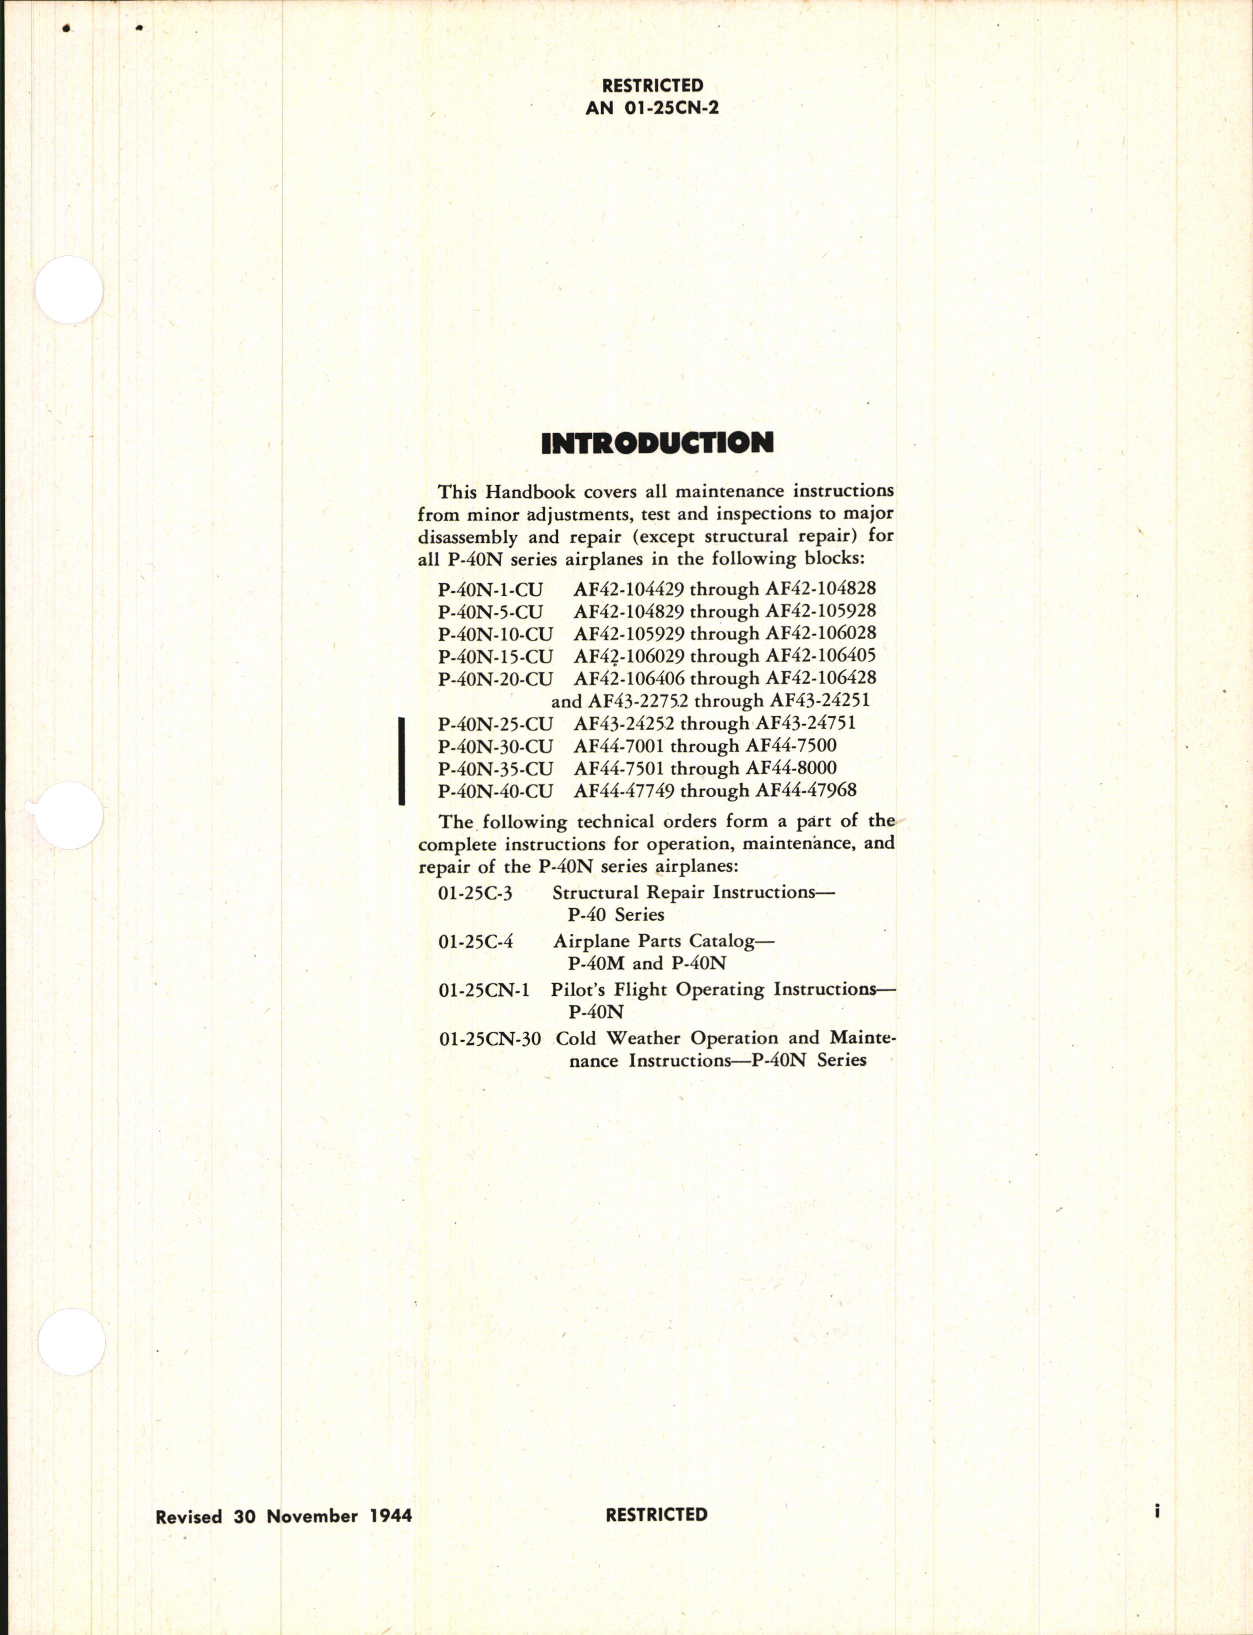 Sample page 5 from AirCorps Library document: Erection & Maintenance Instructions for P-40N Series, Kittyhawk IV